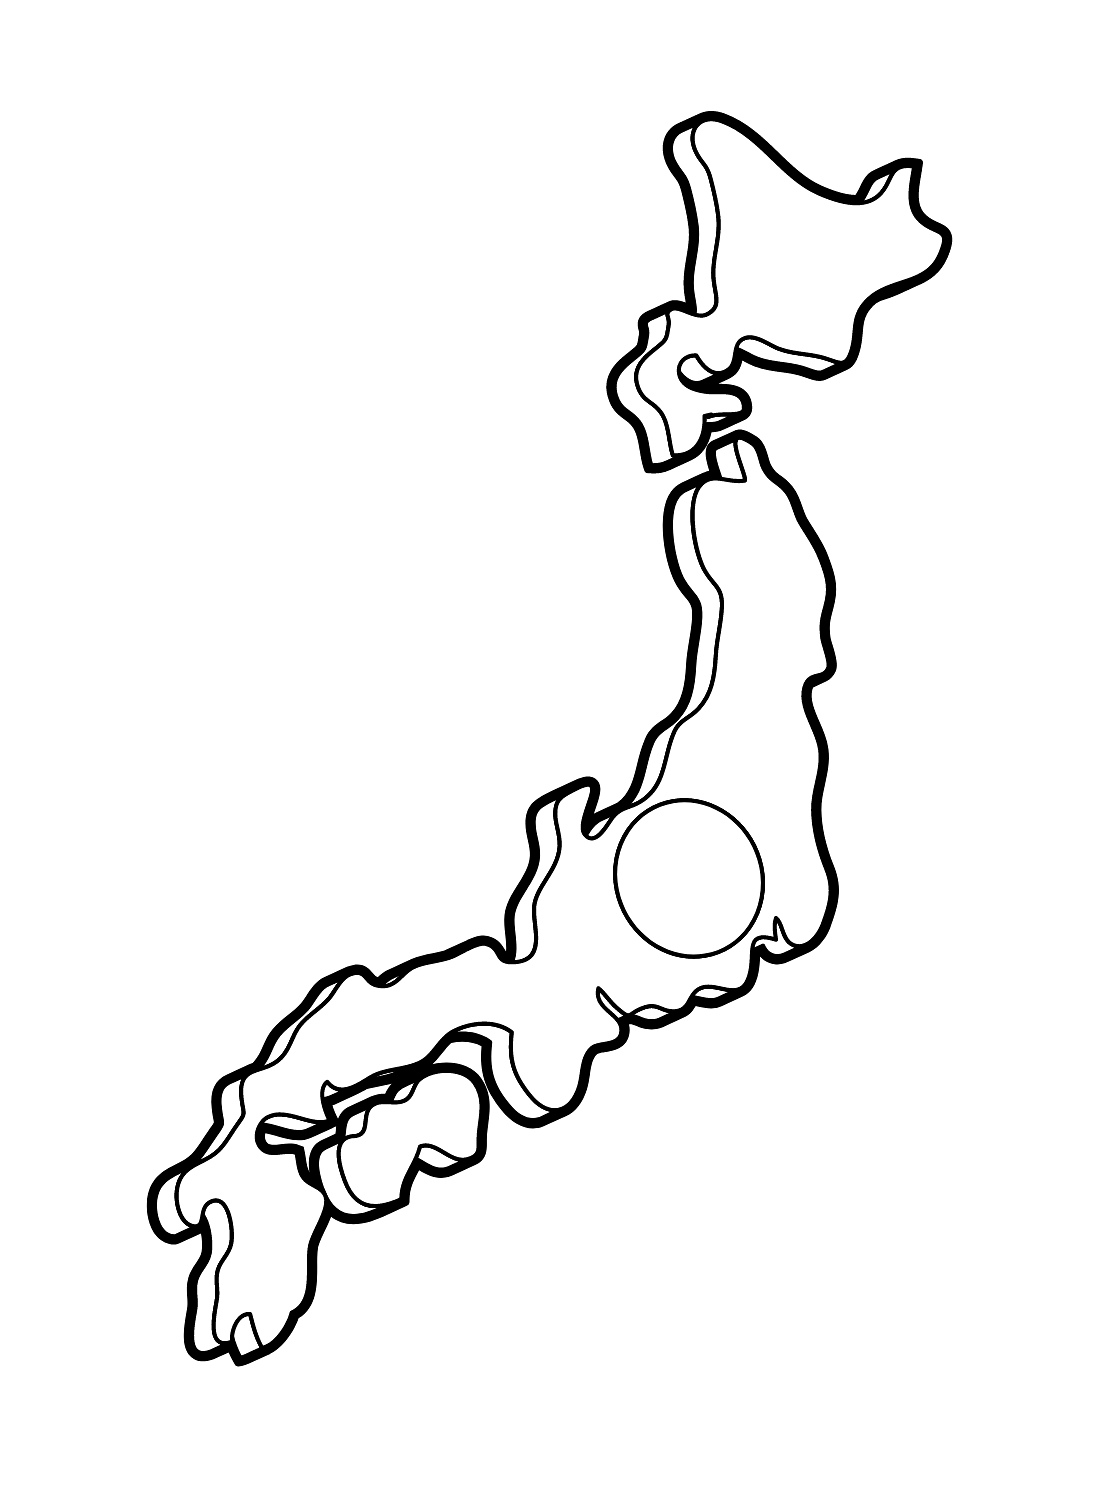 Map of Japan Coloring Page